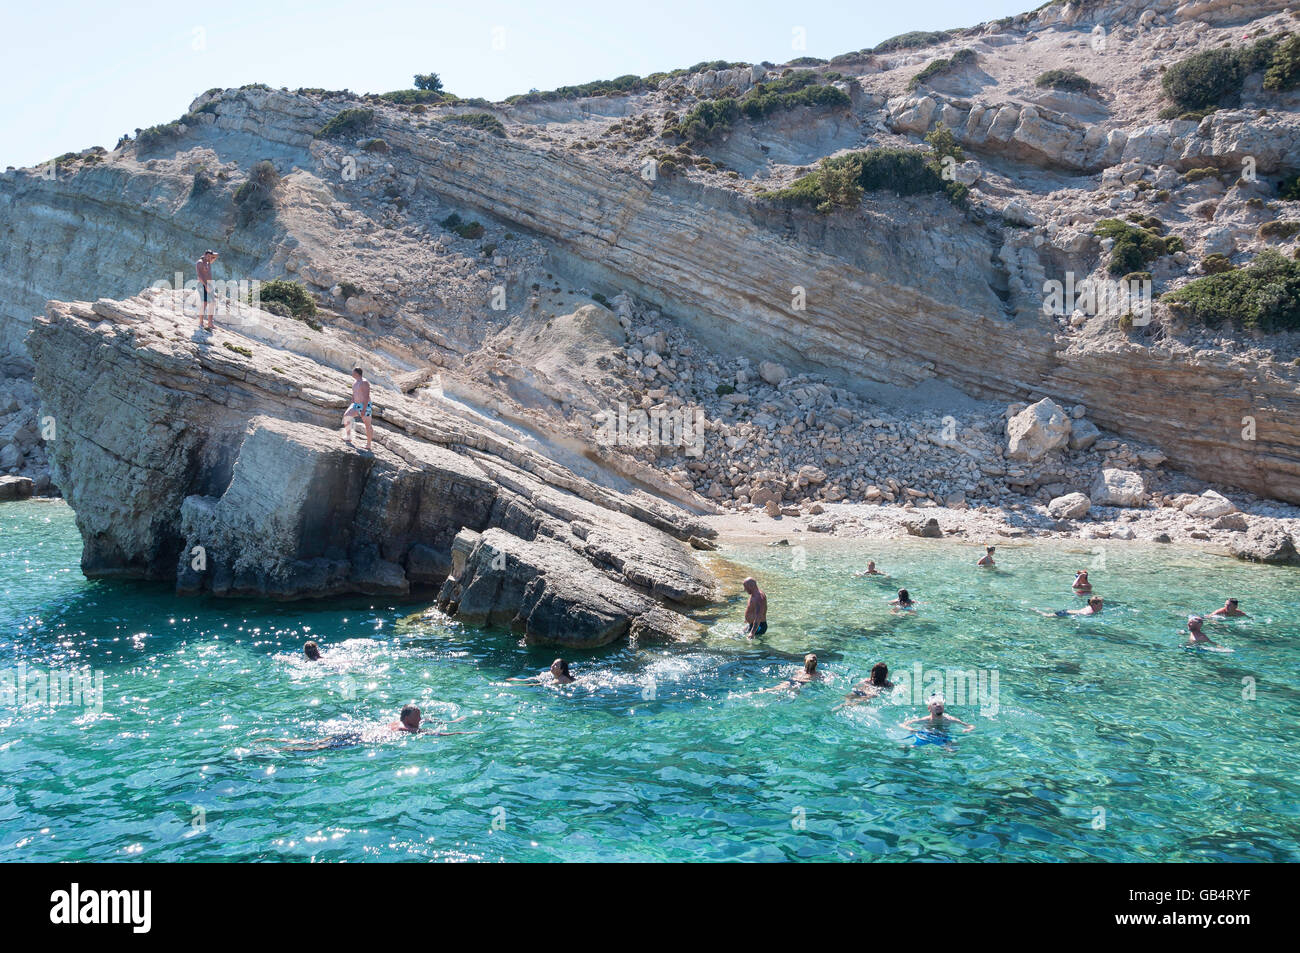 'Three island excursion' tourists swimming off boat on island of Pláti, The Dodecanese, South Aegean Region, Greece Stock Photo